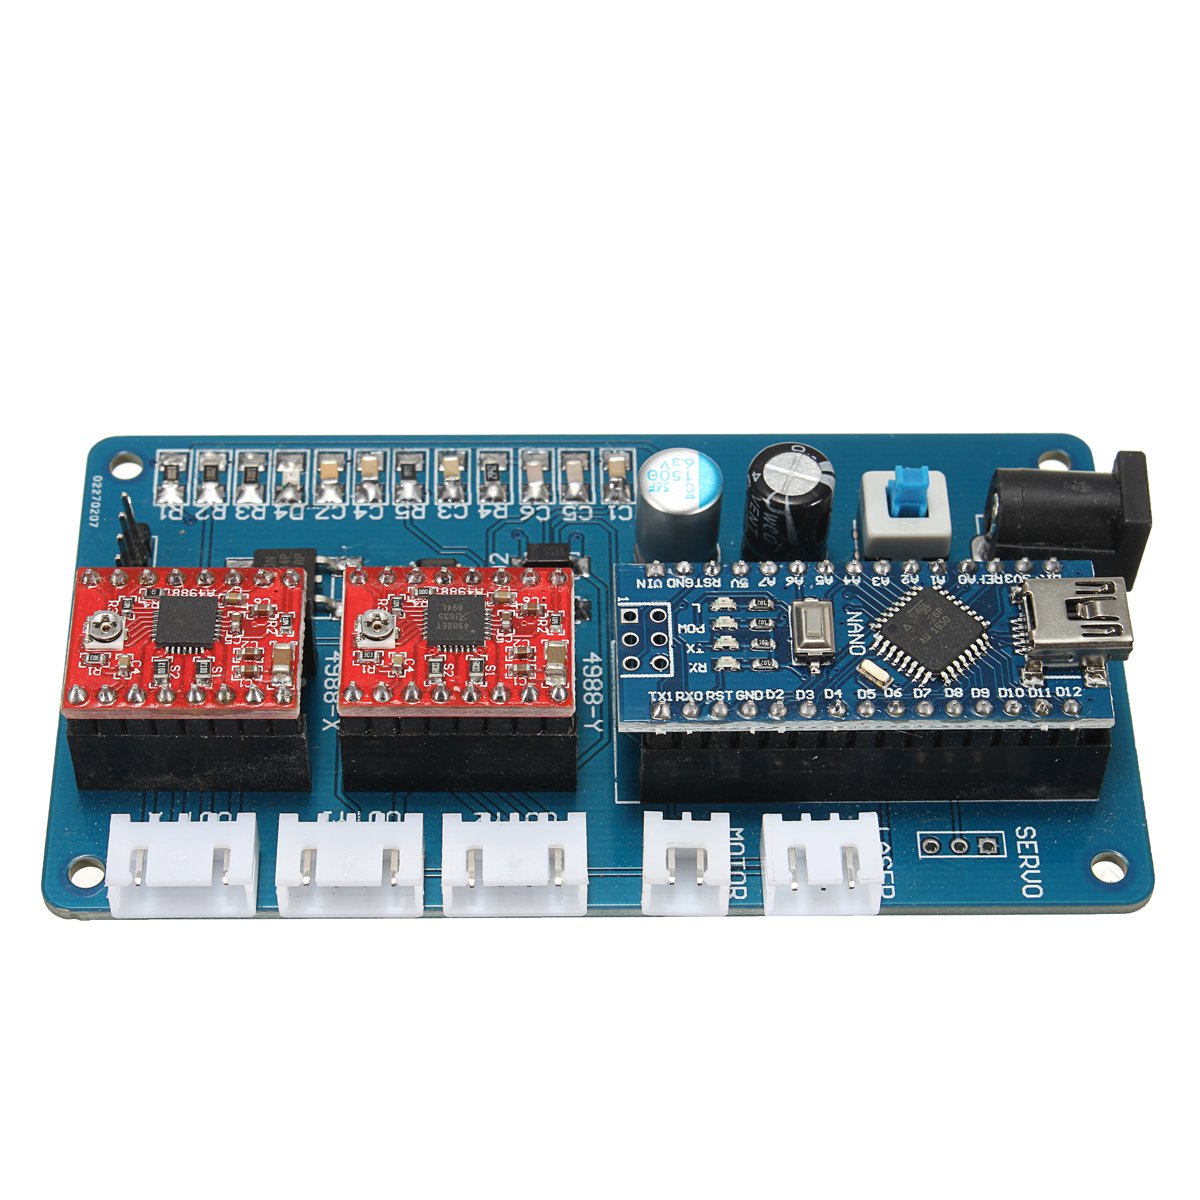 2 Axis GRBL Control Panel Board For DIY Laser Engraving Machine Benbox USB Stepper Driver Board 2